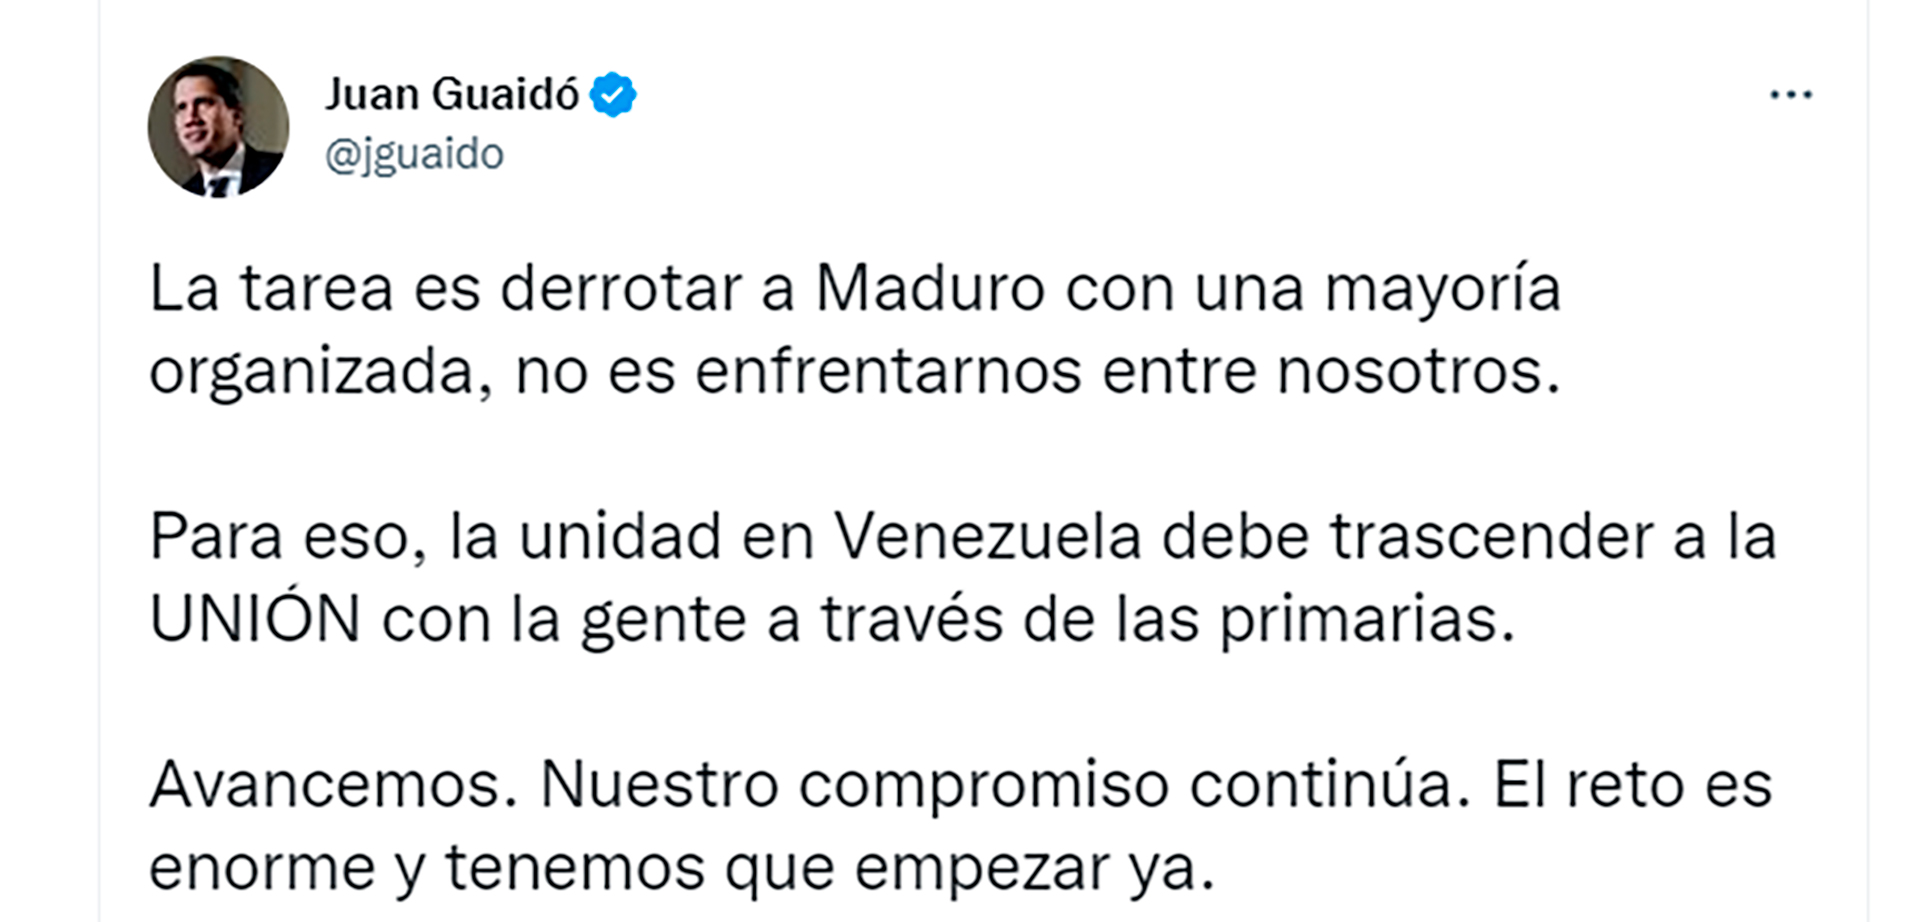 The tweet in which Guidó demanded the primary schedule